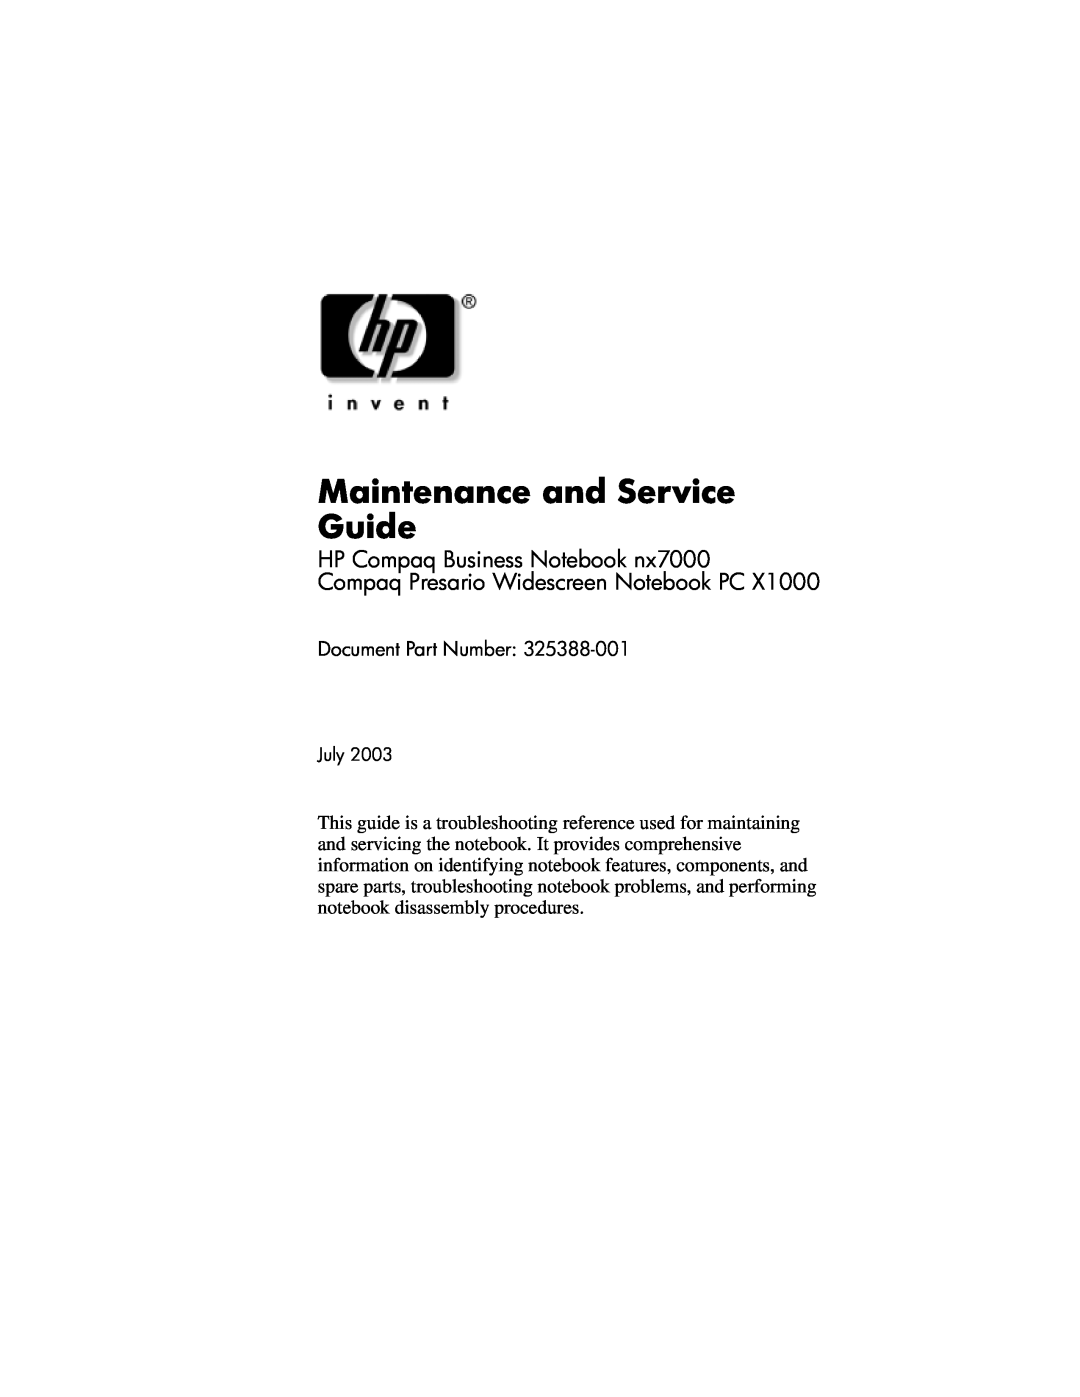 HP X1000 manual Document Part Number, Maintenance and Service Guide, HP Compaq Business Notebook nx7000, July 